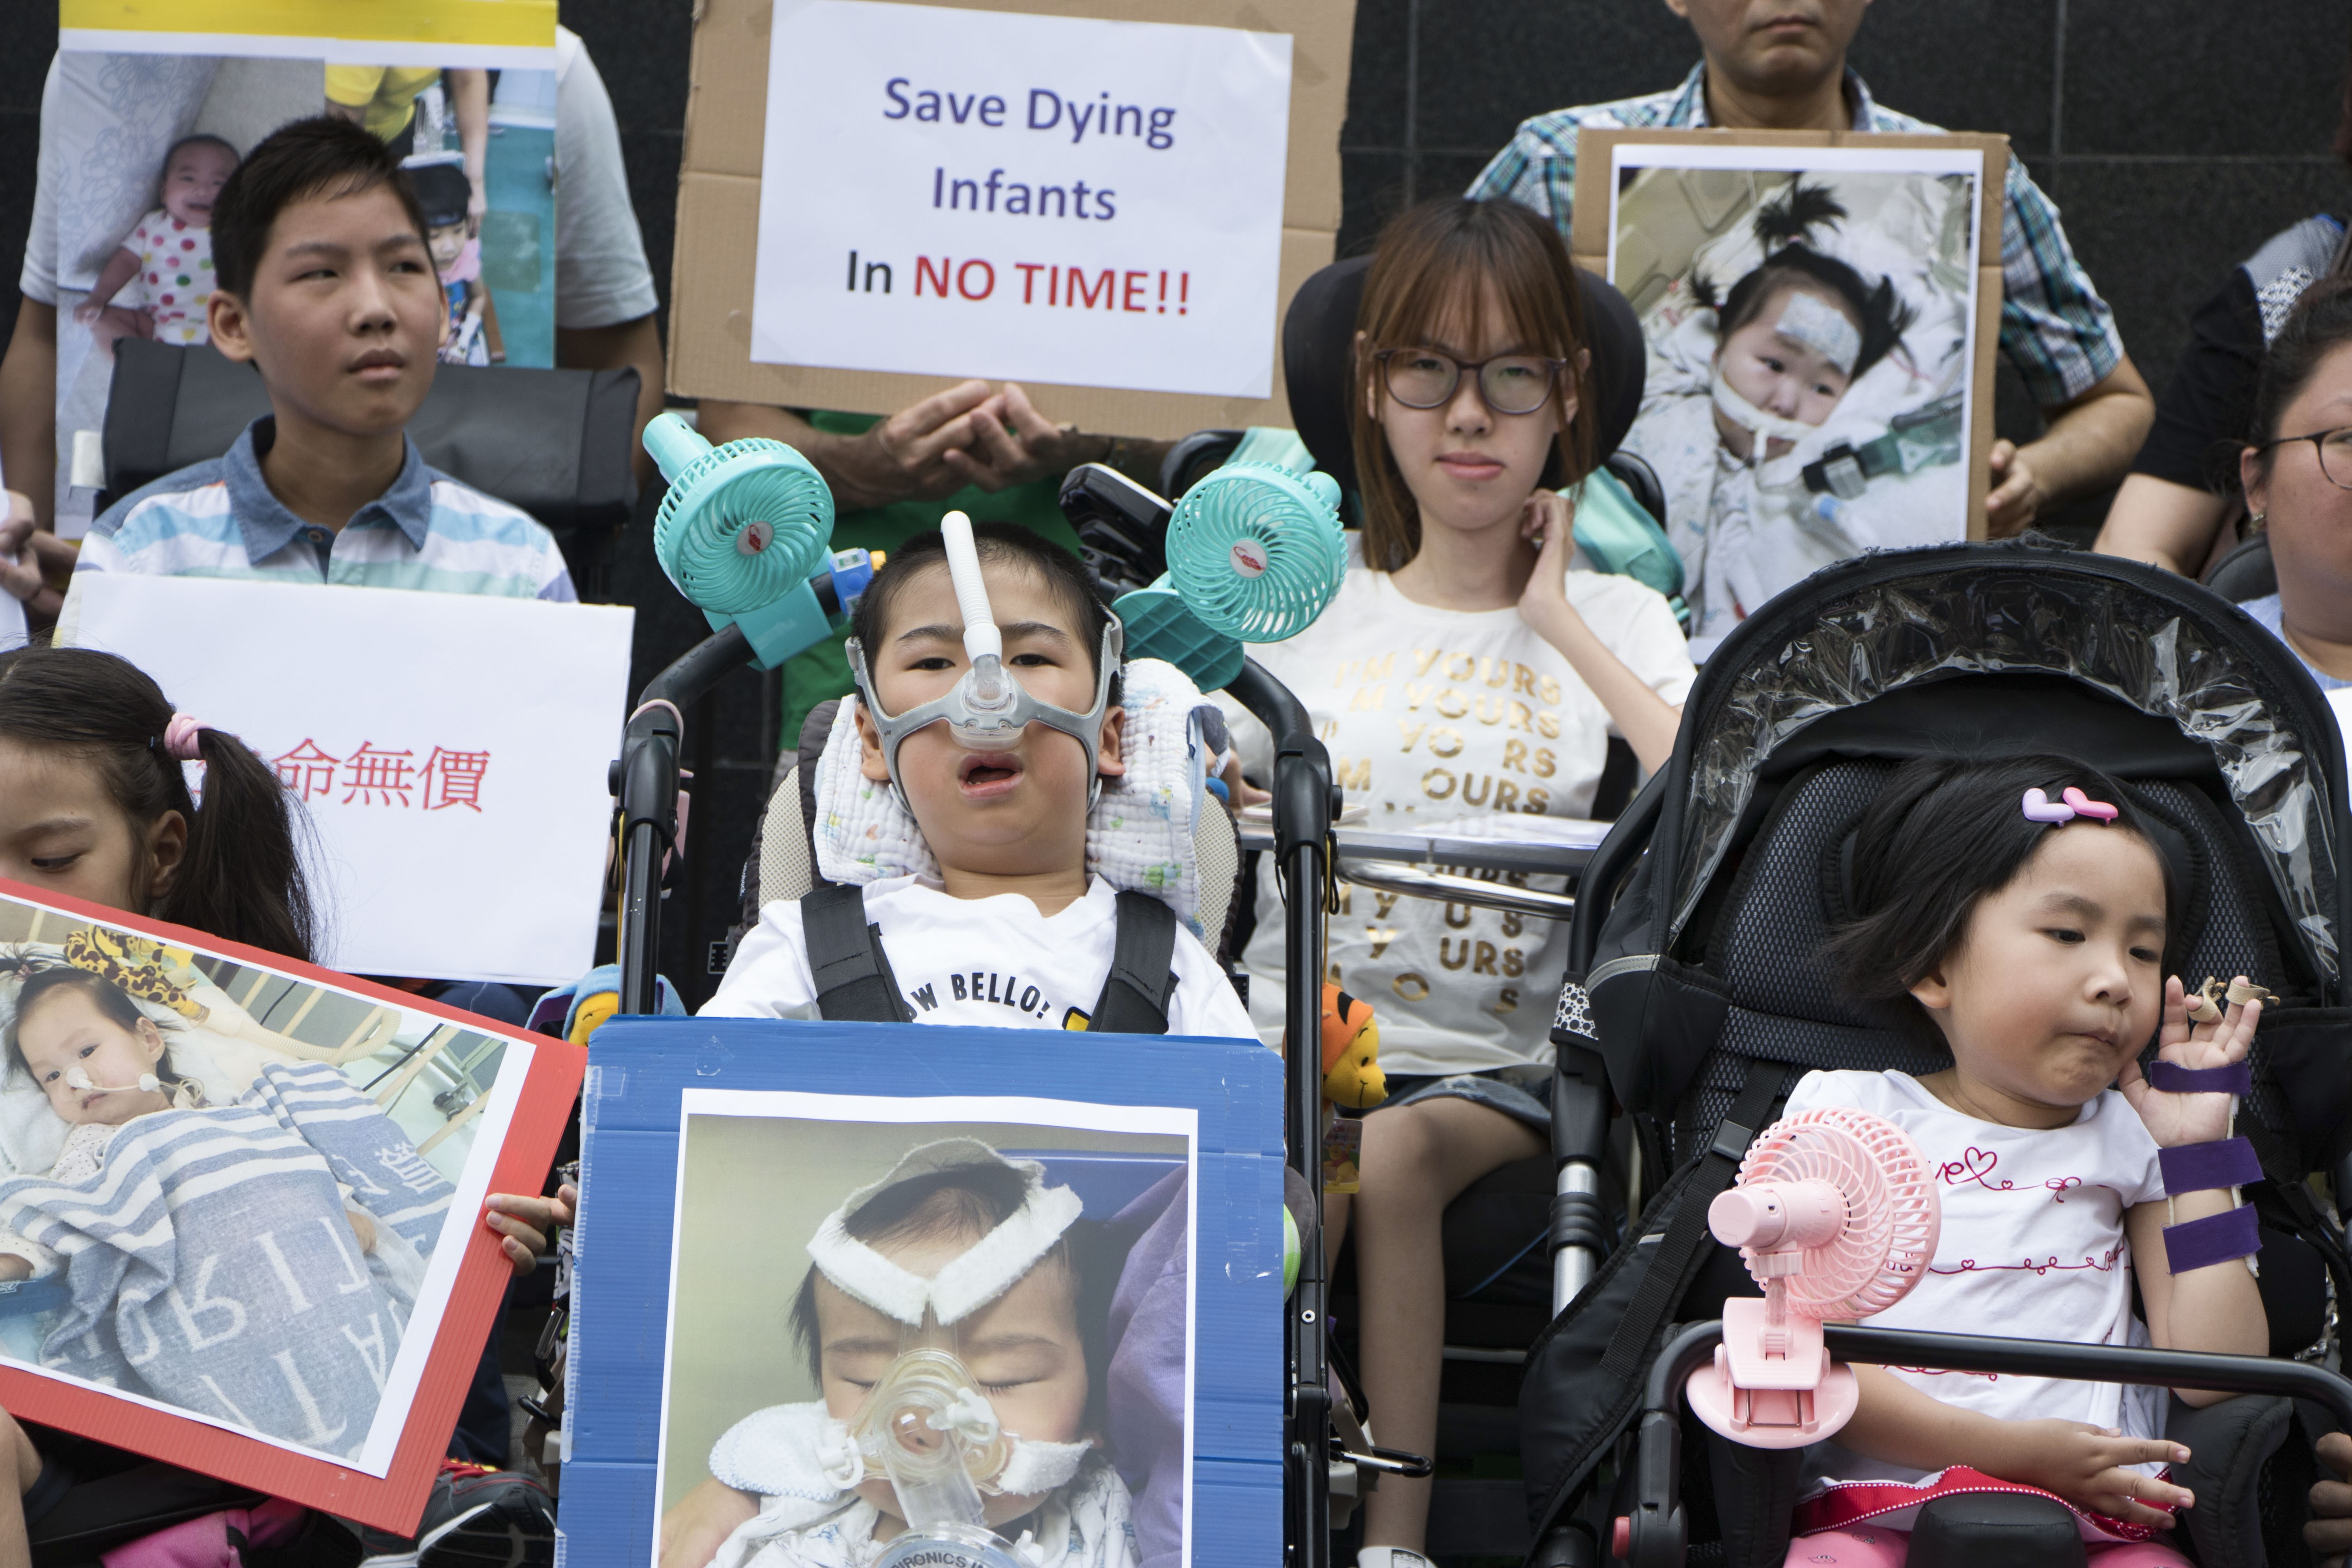 Children suffering from spinal muscular atrophy rally outside the government headquarters in Admiralty for more support in October 2017. Photo: Kwok Wing-kin